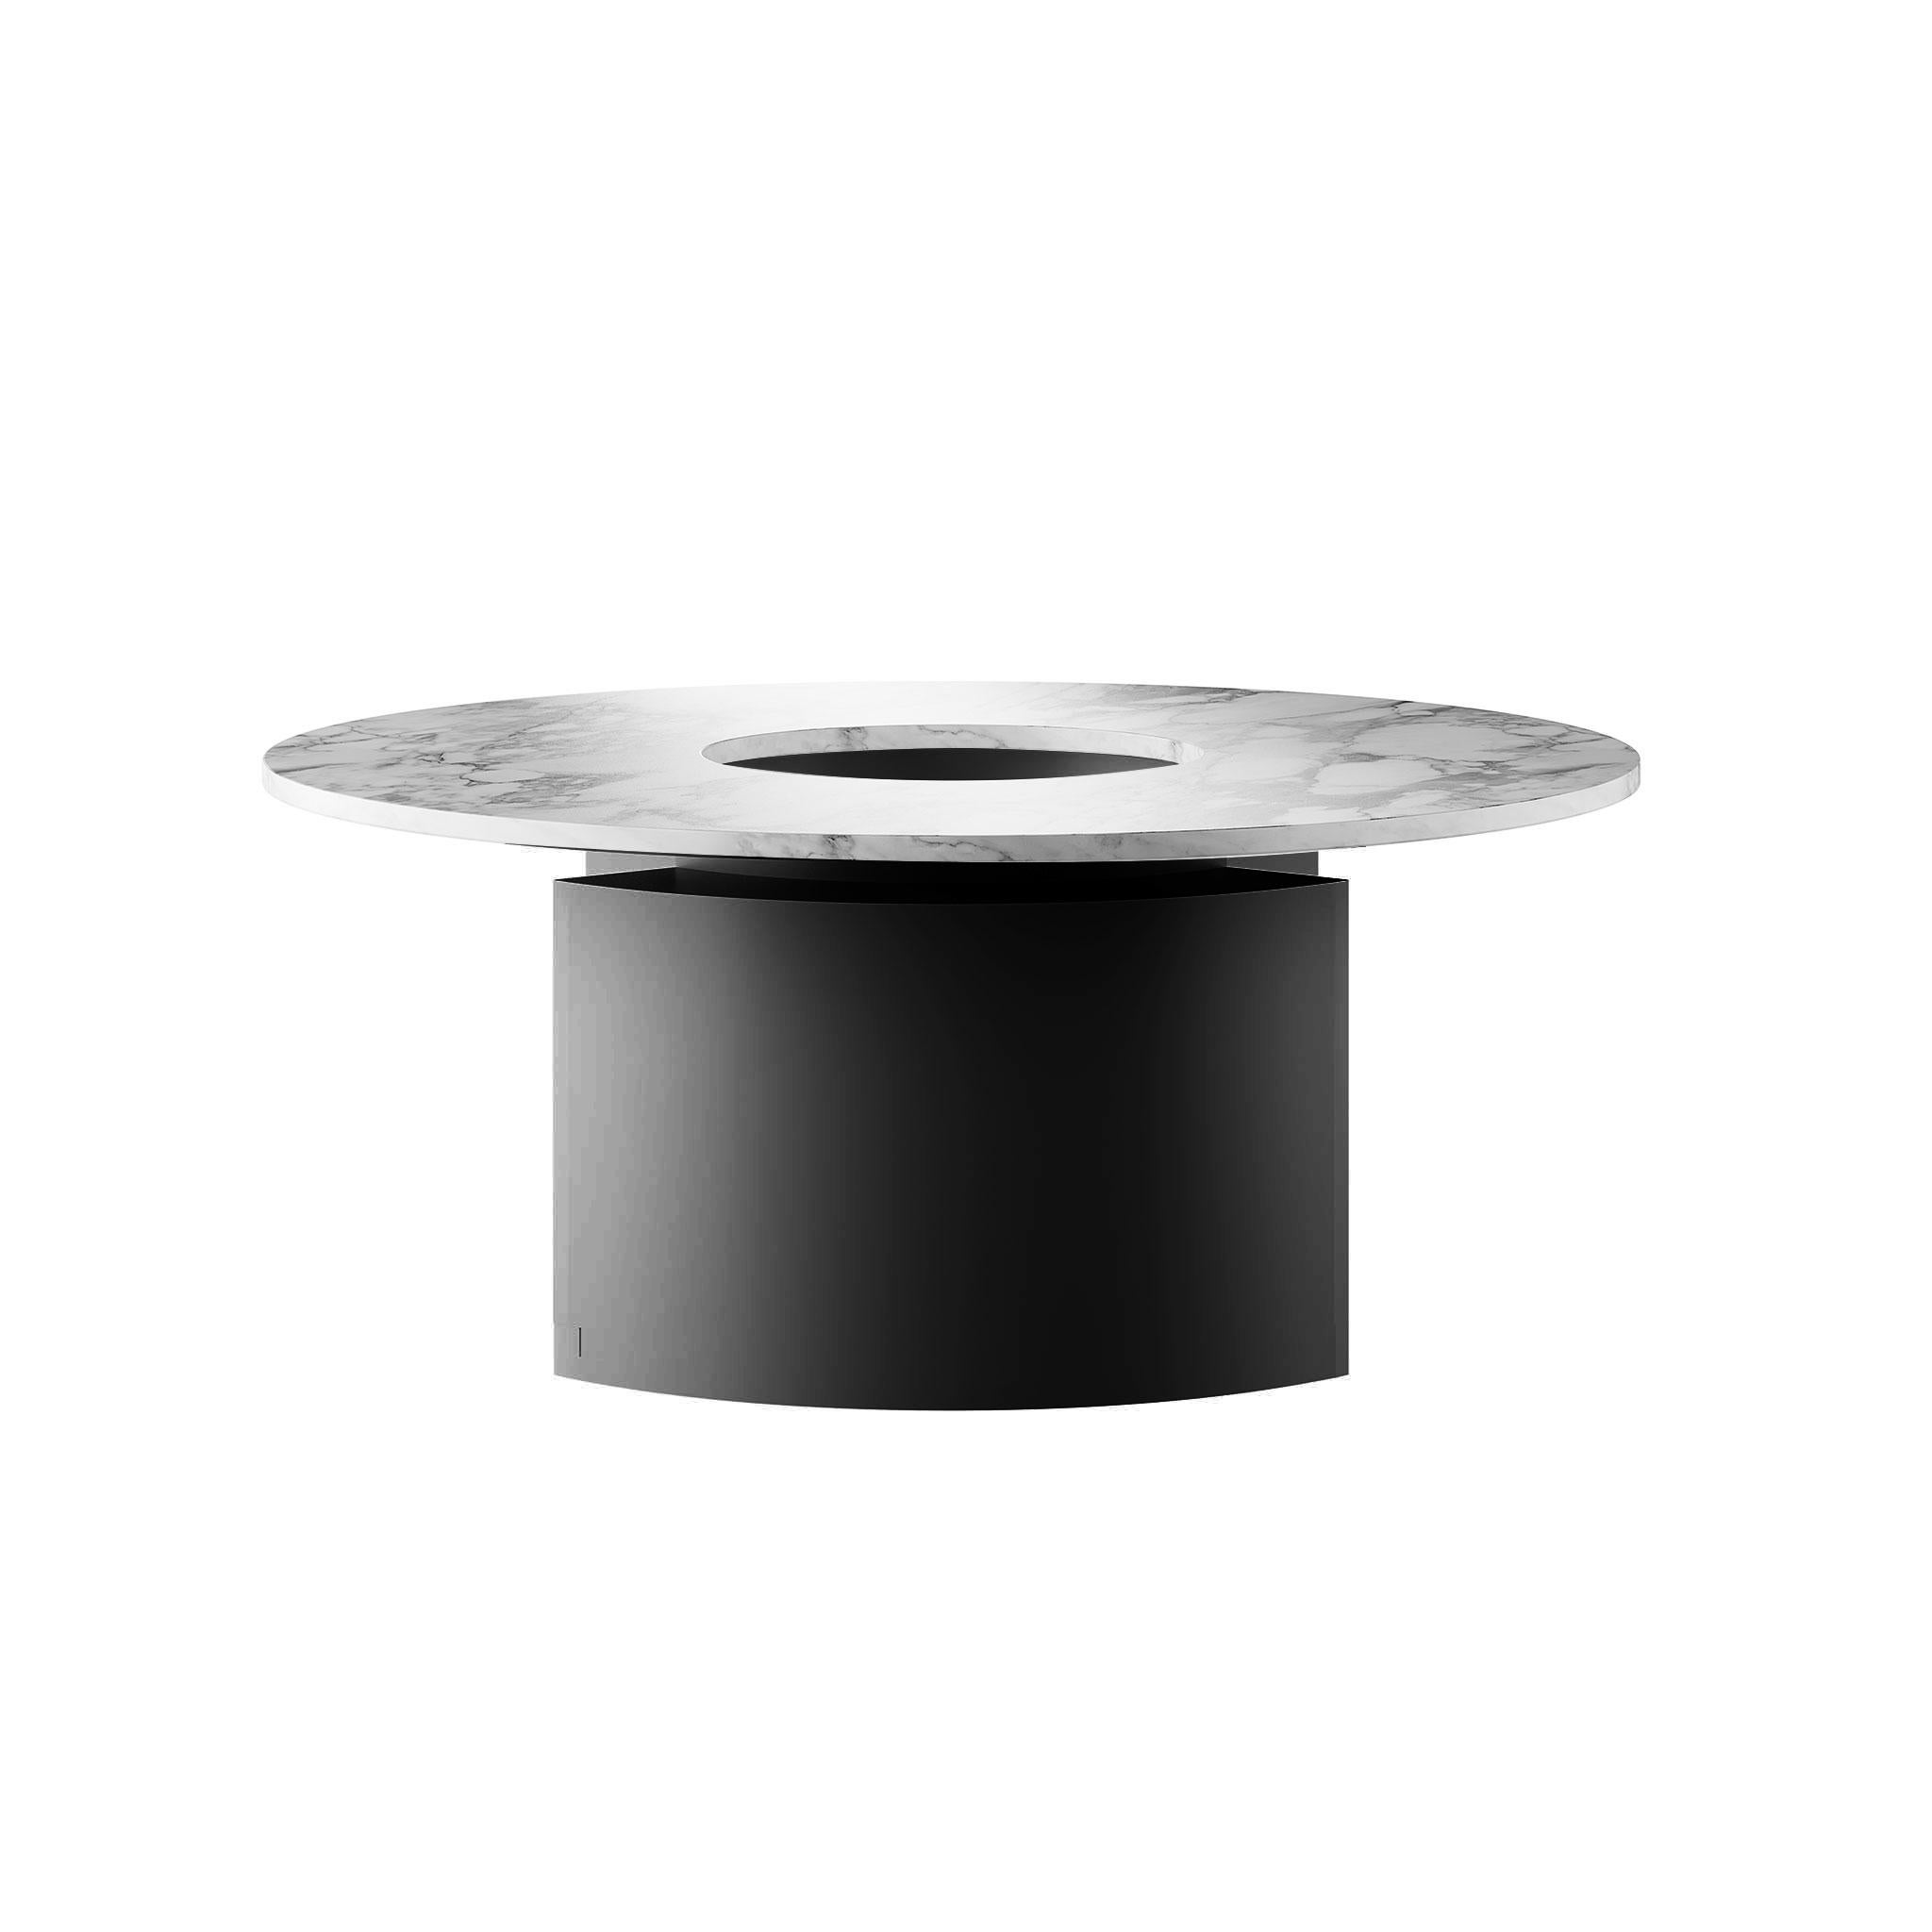 Lacquered Minimal Modern Round Center Table Calacatta White Marble Top Black Matte Lacquer For Sale